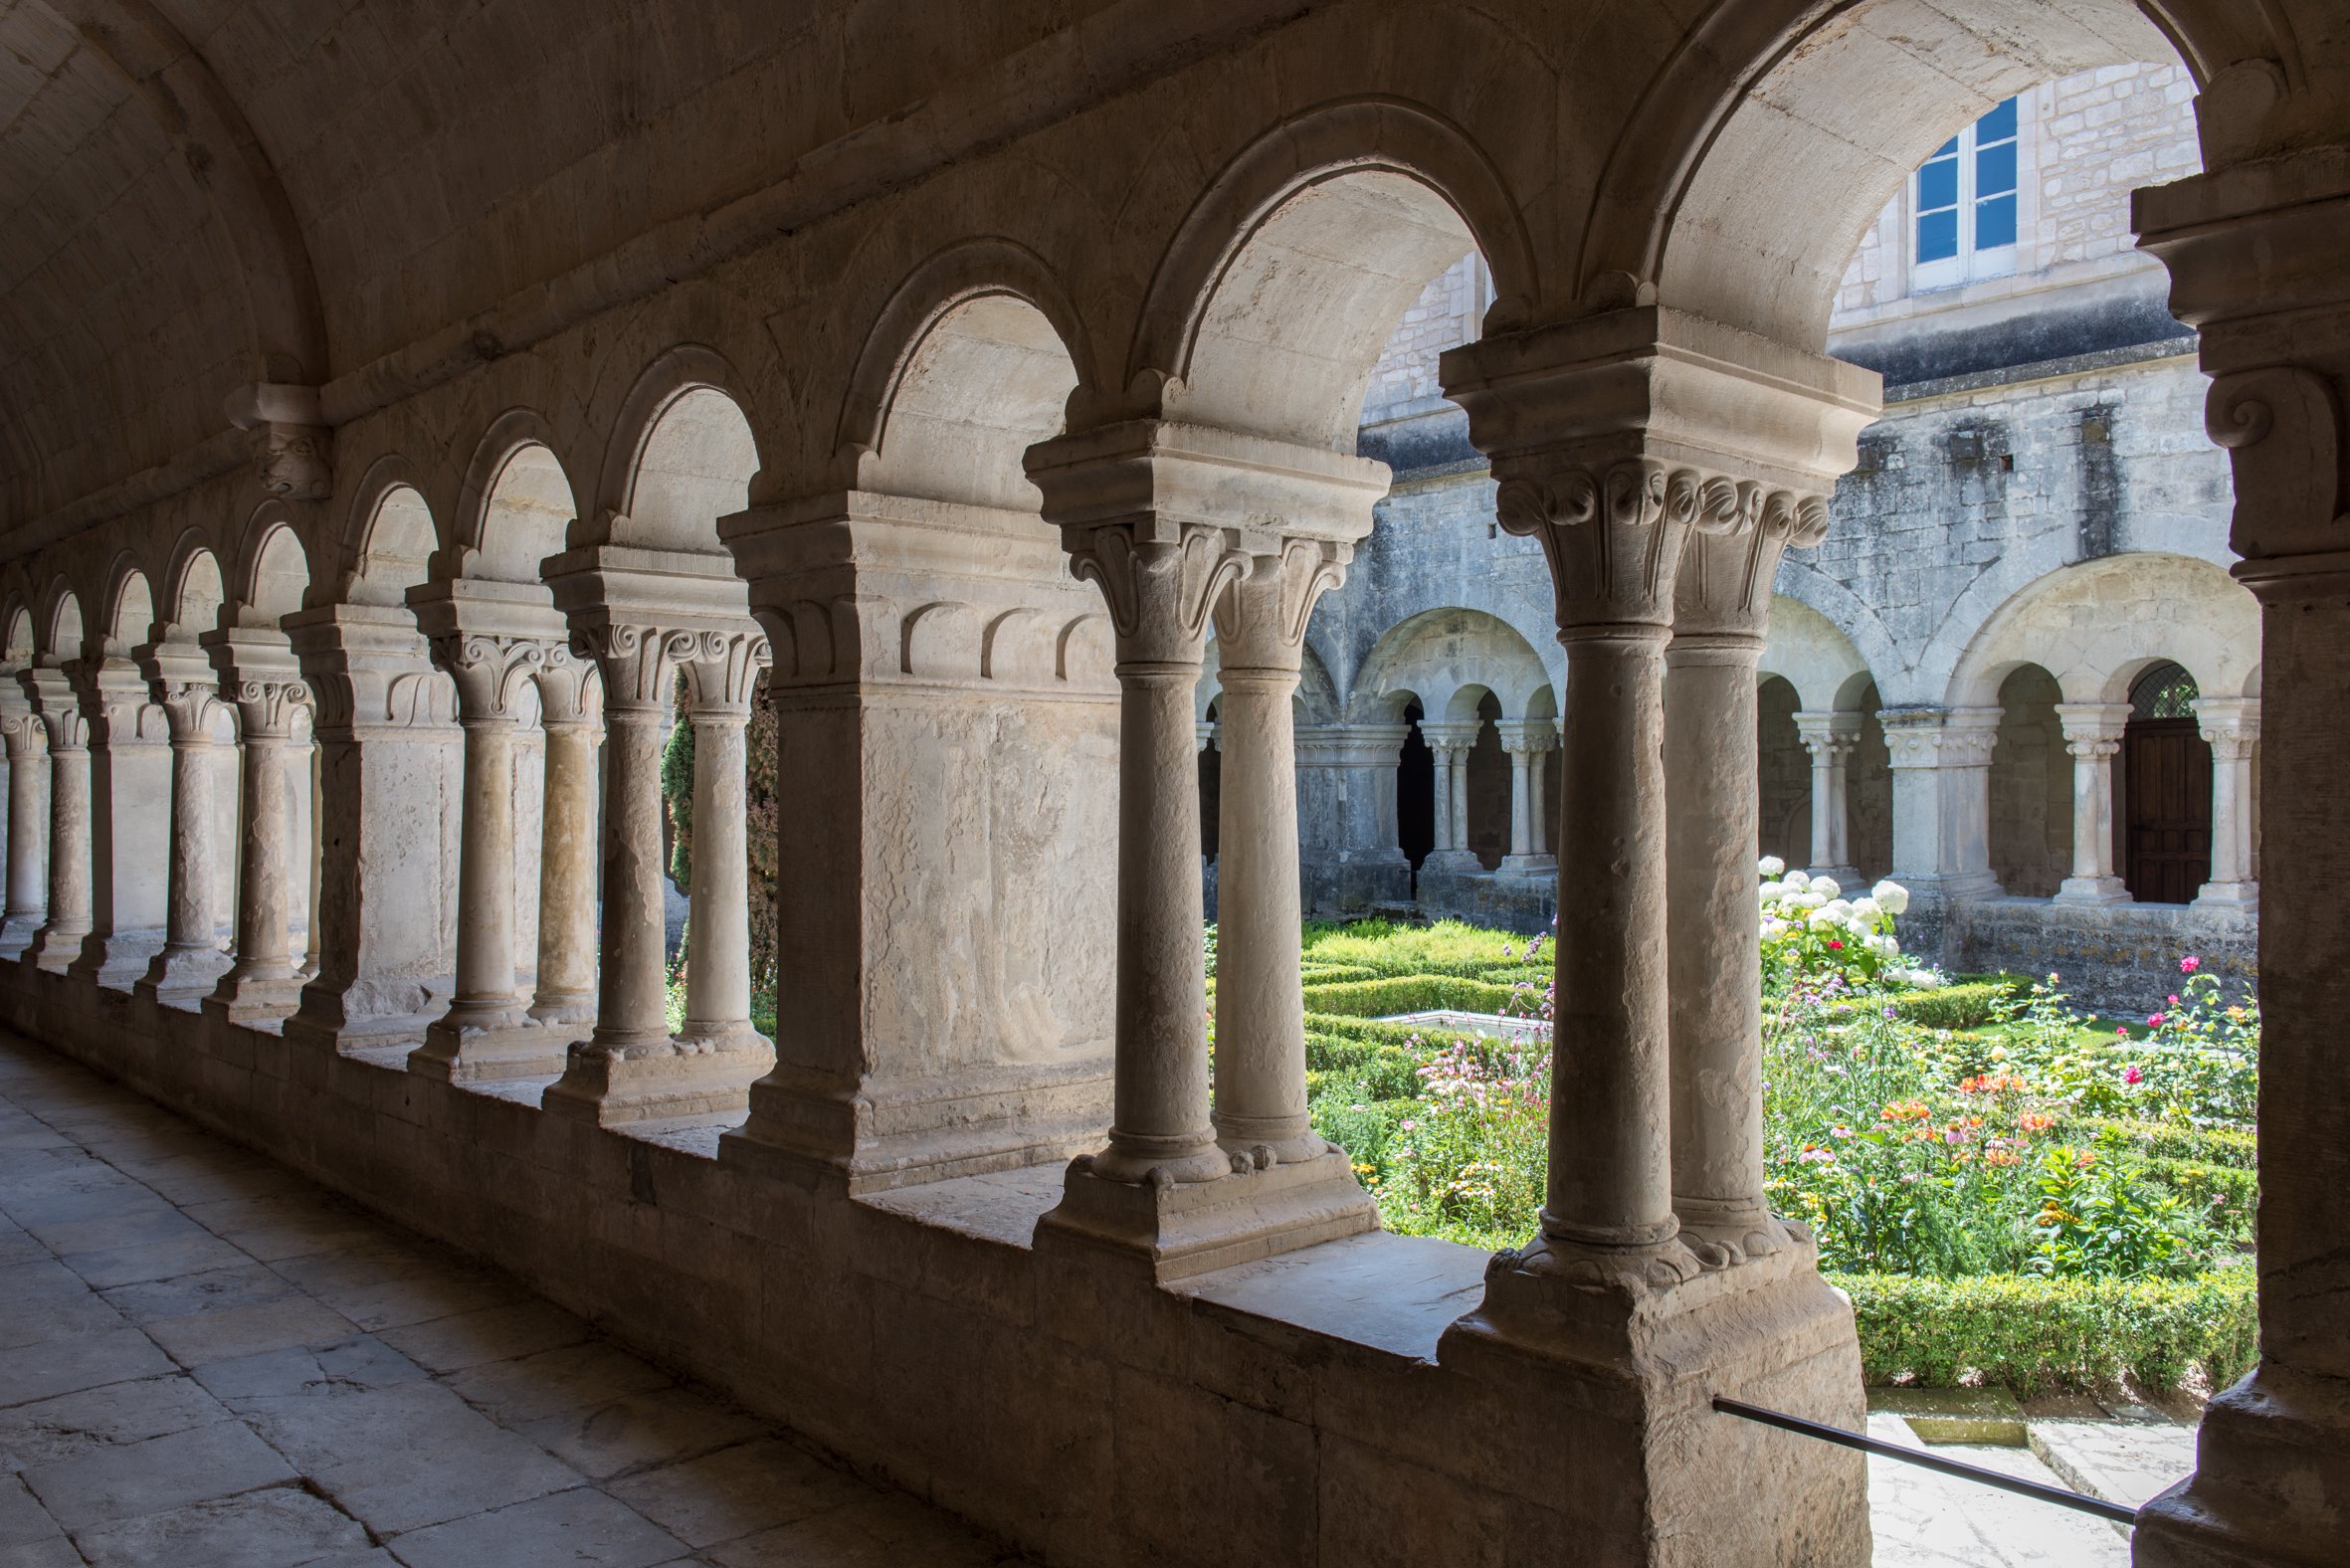 Cloister of the Sénanque Abbey